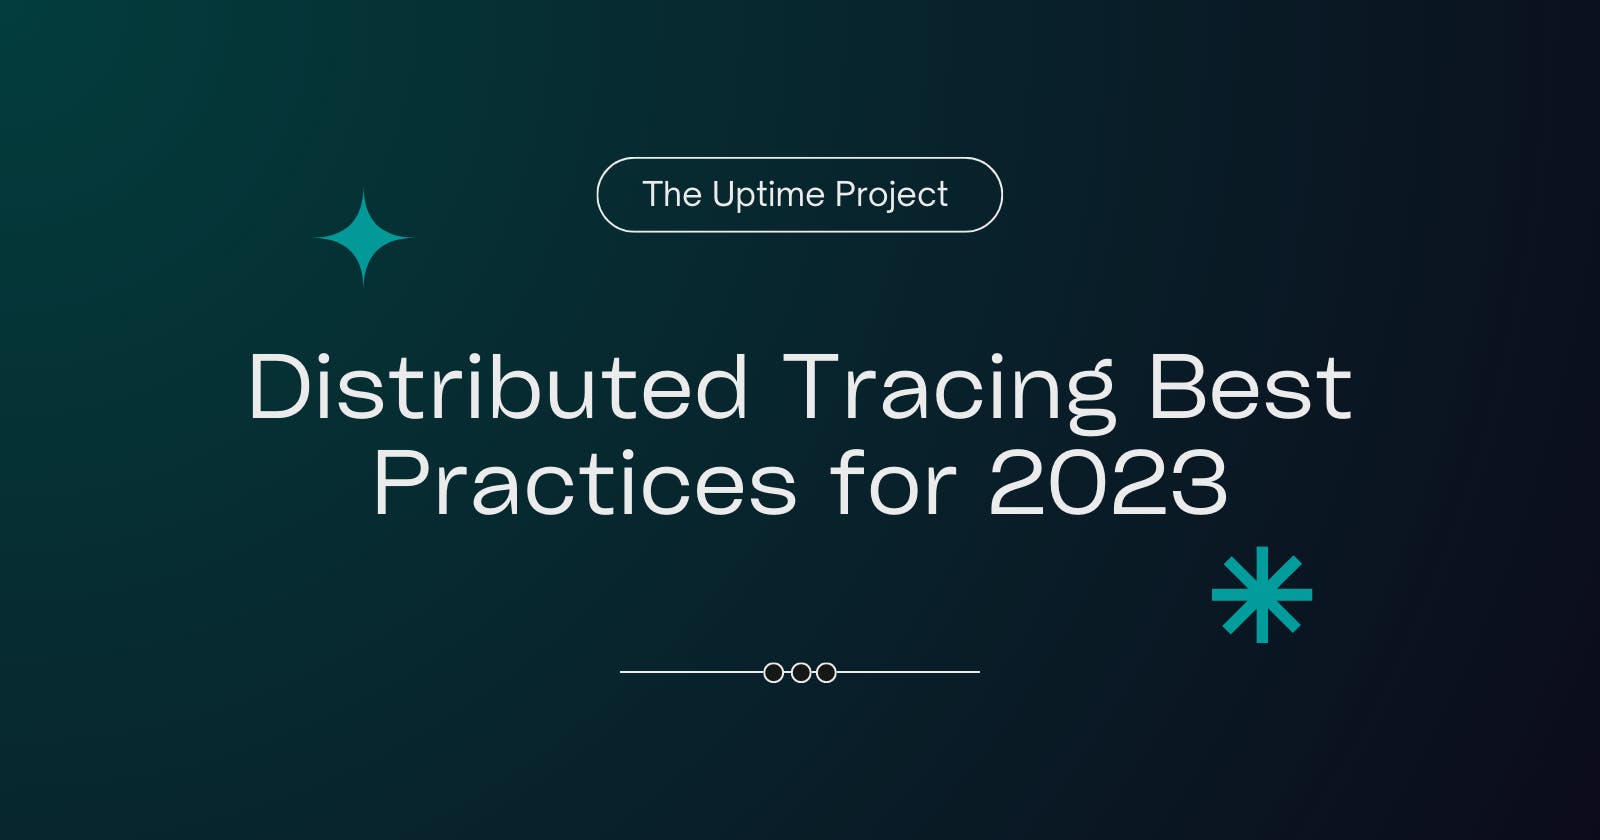 Distributed Tracing Best Practices for 2023